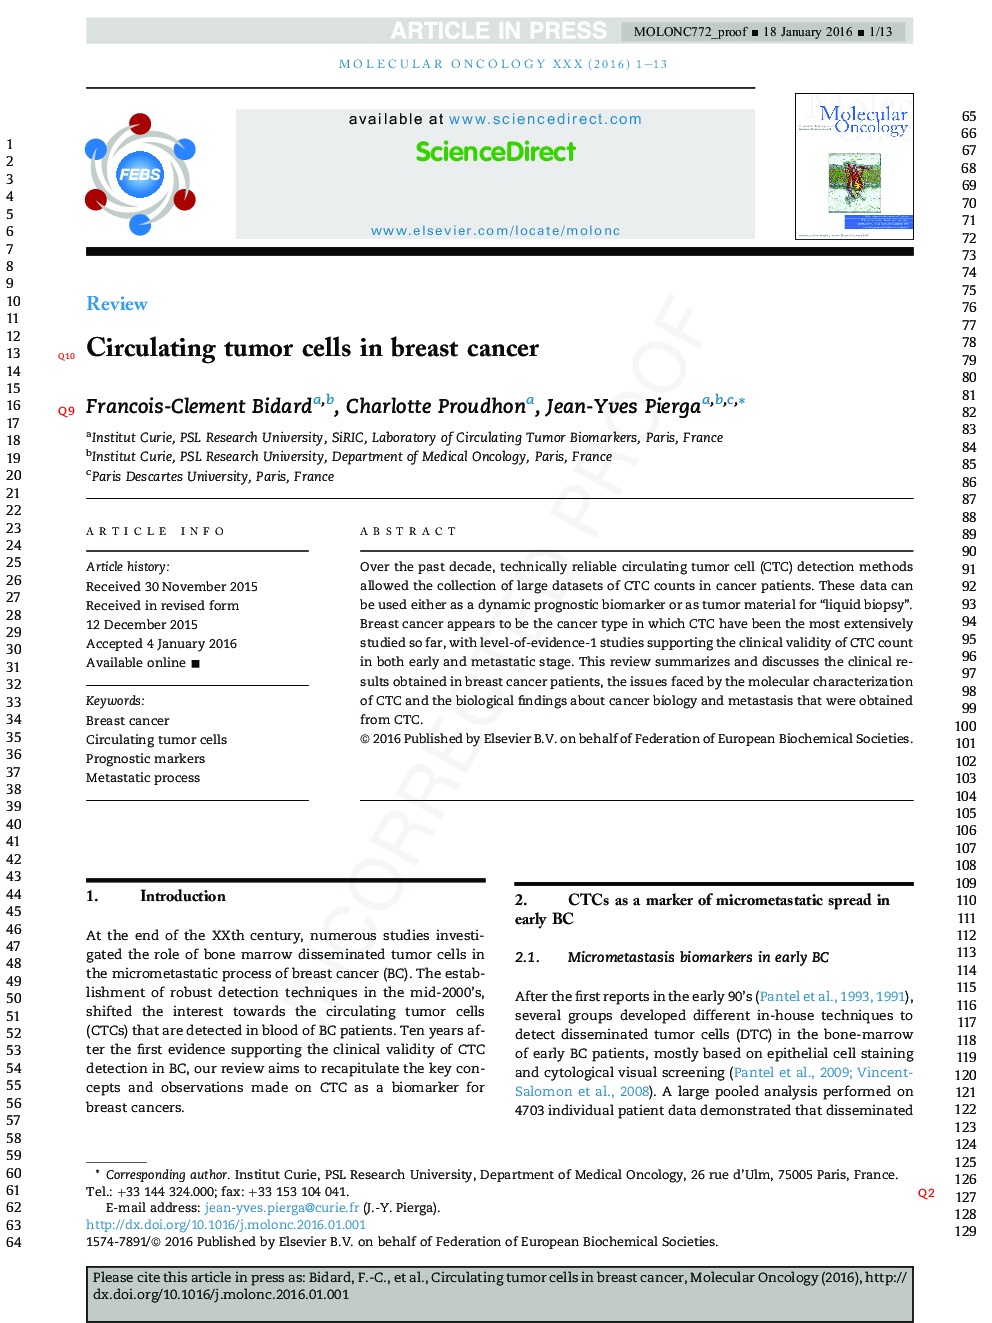 Circulating tumor cells in breast cancer